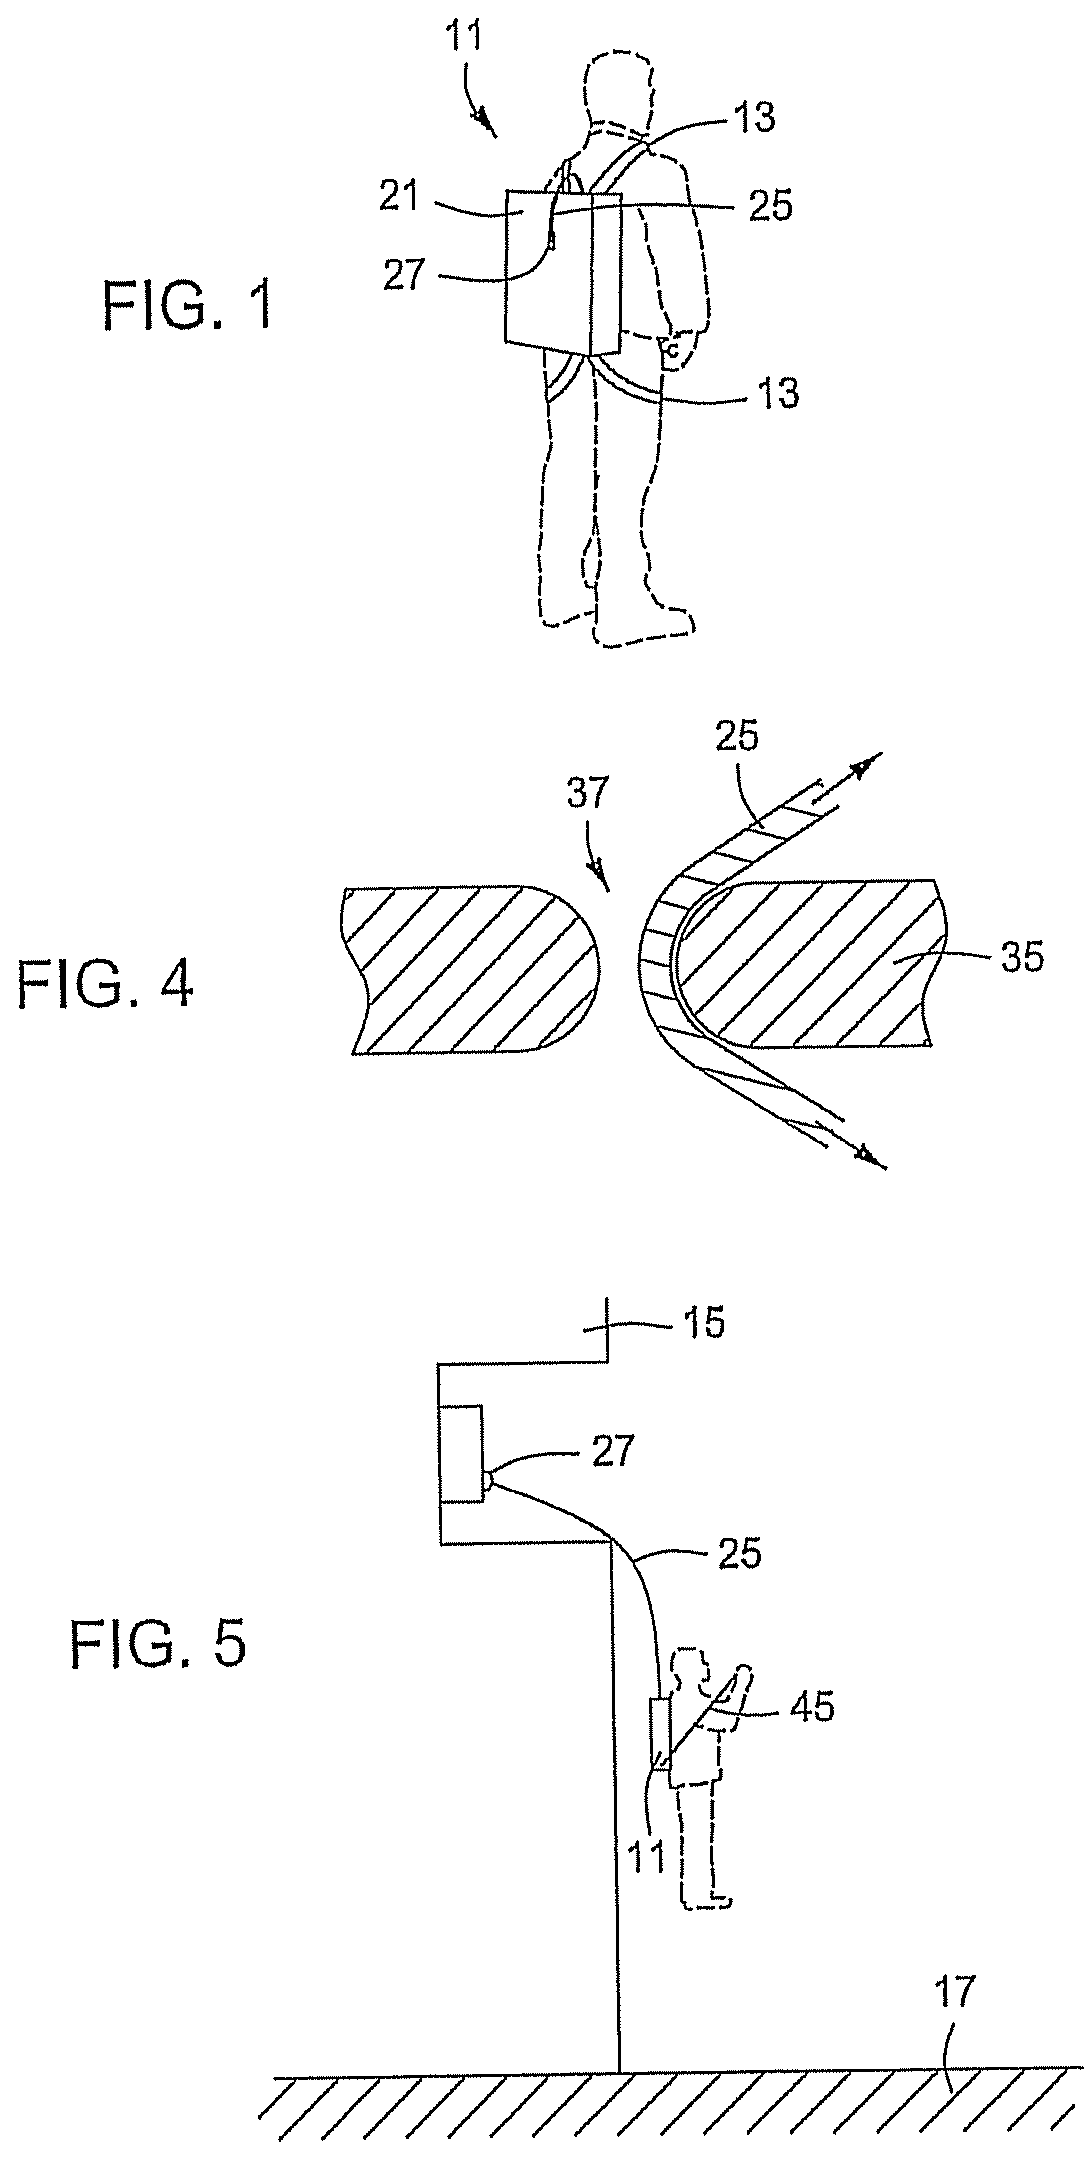 System and apparatus for personal high altitude rappel escape safety device